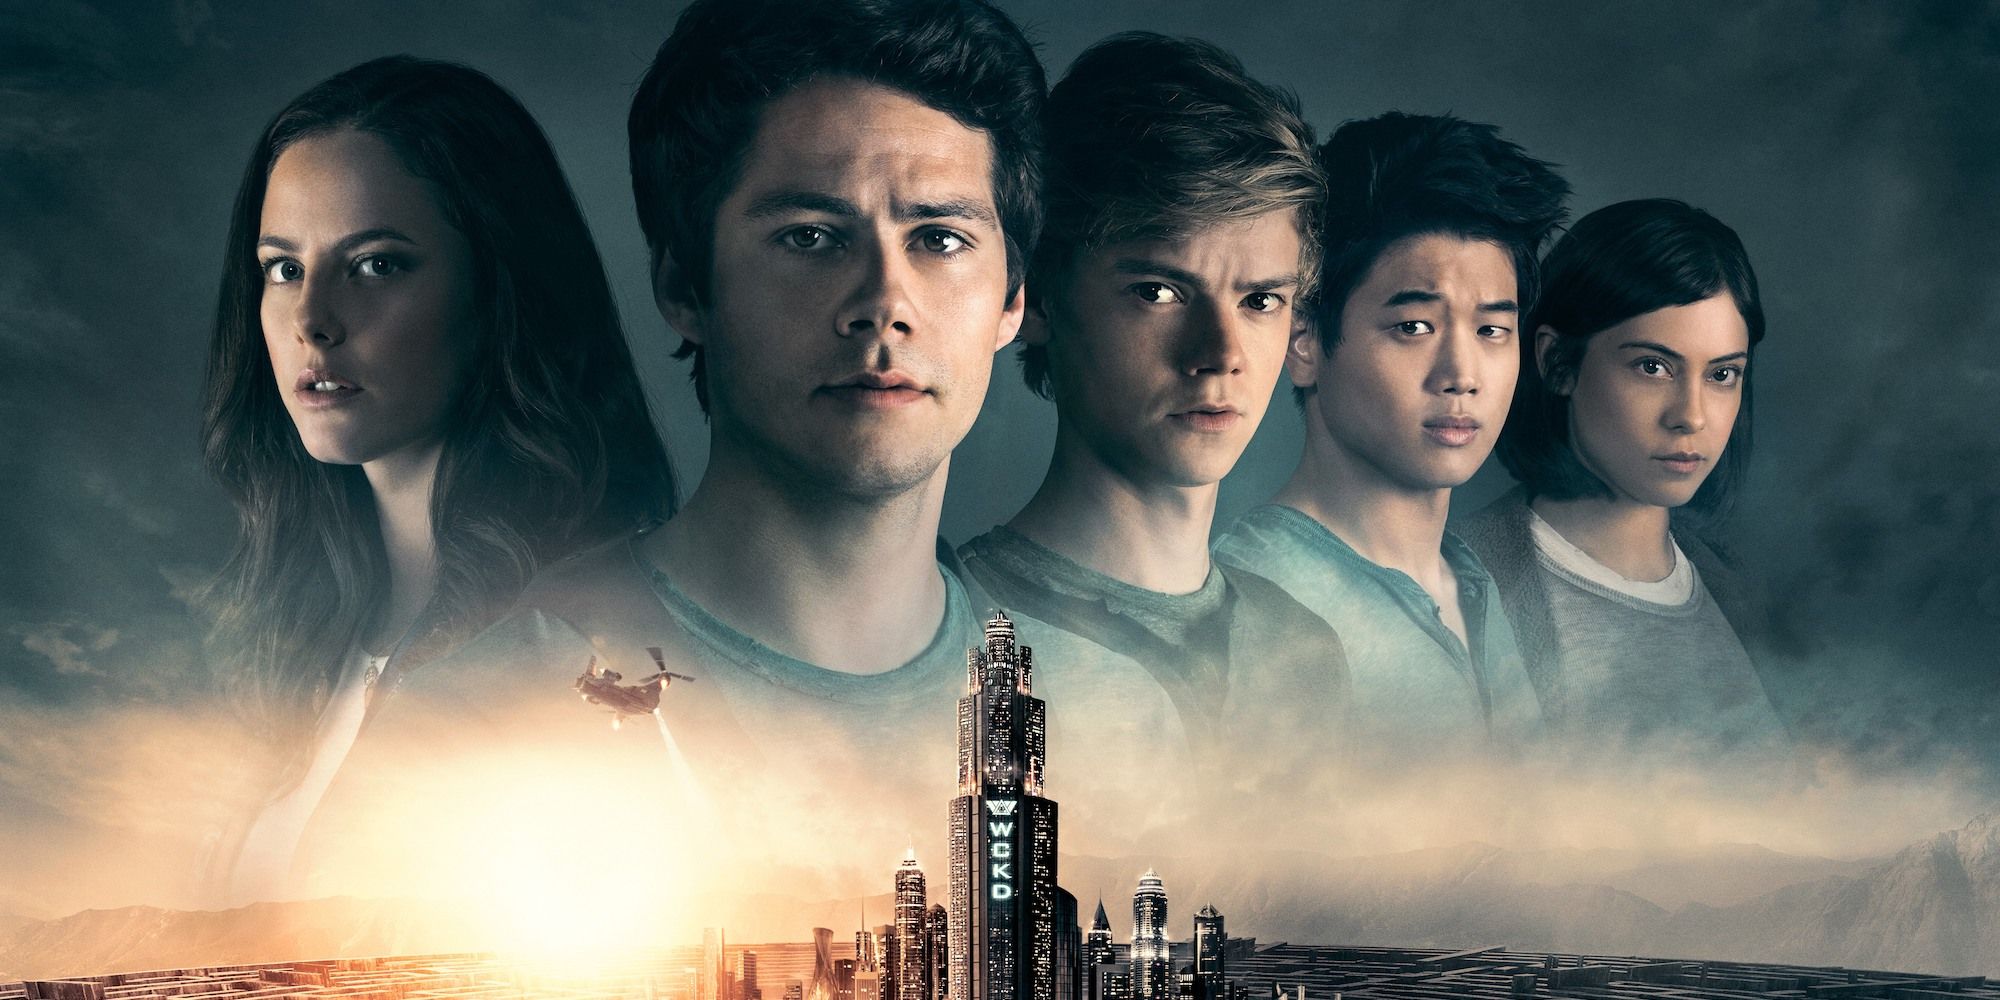 cast of the death cure